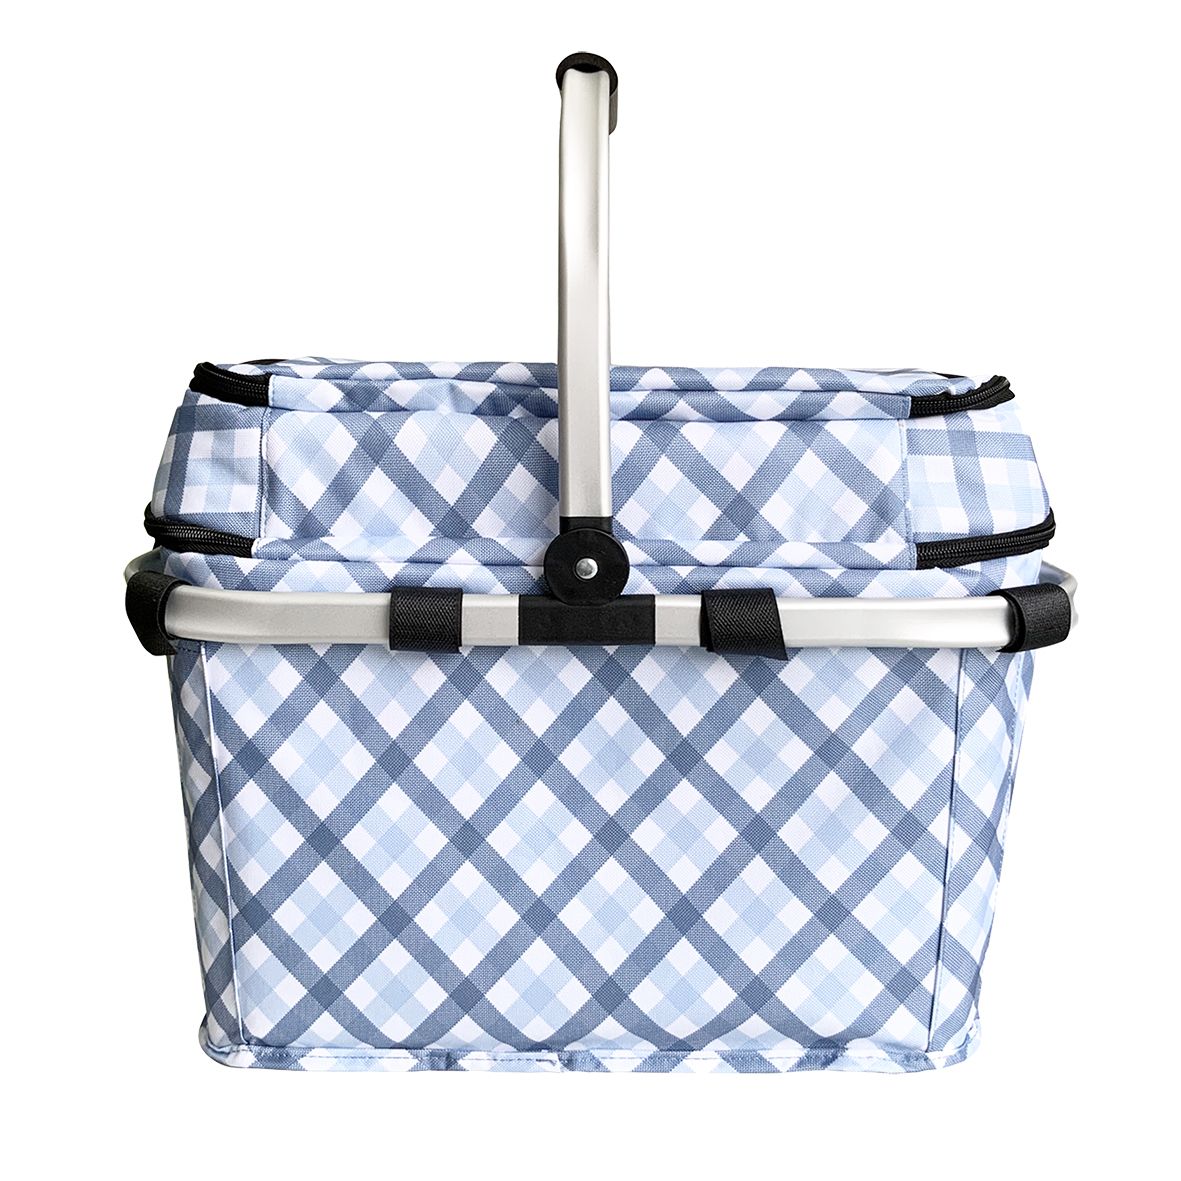 Sachi 4 Person Insulated Picnic Basket Gingham Product Image 2